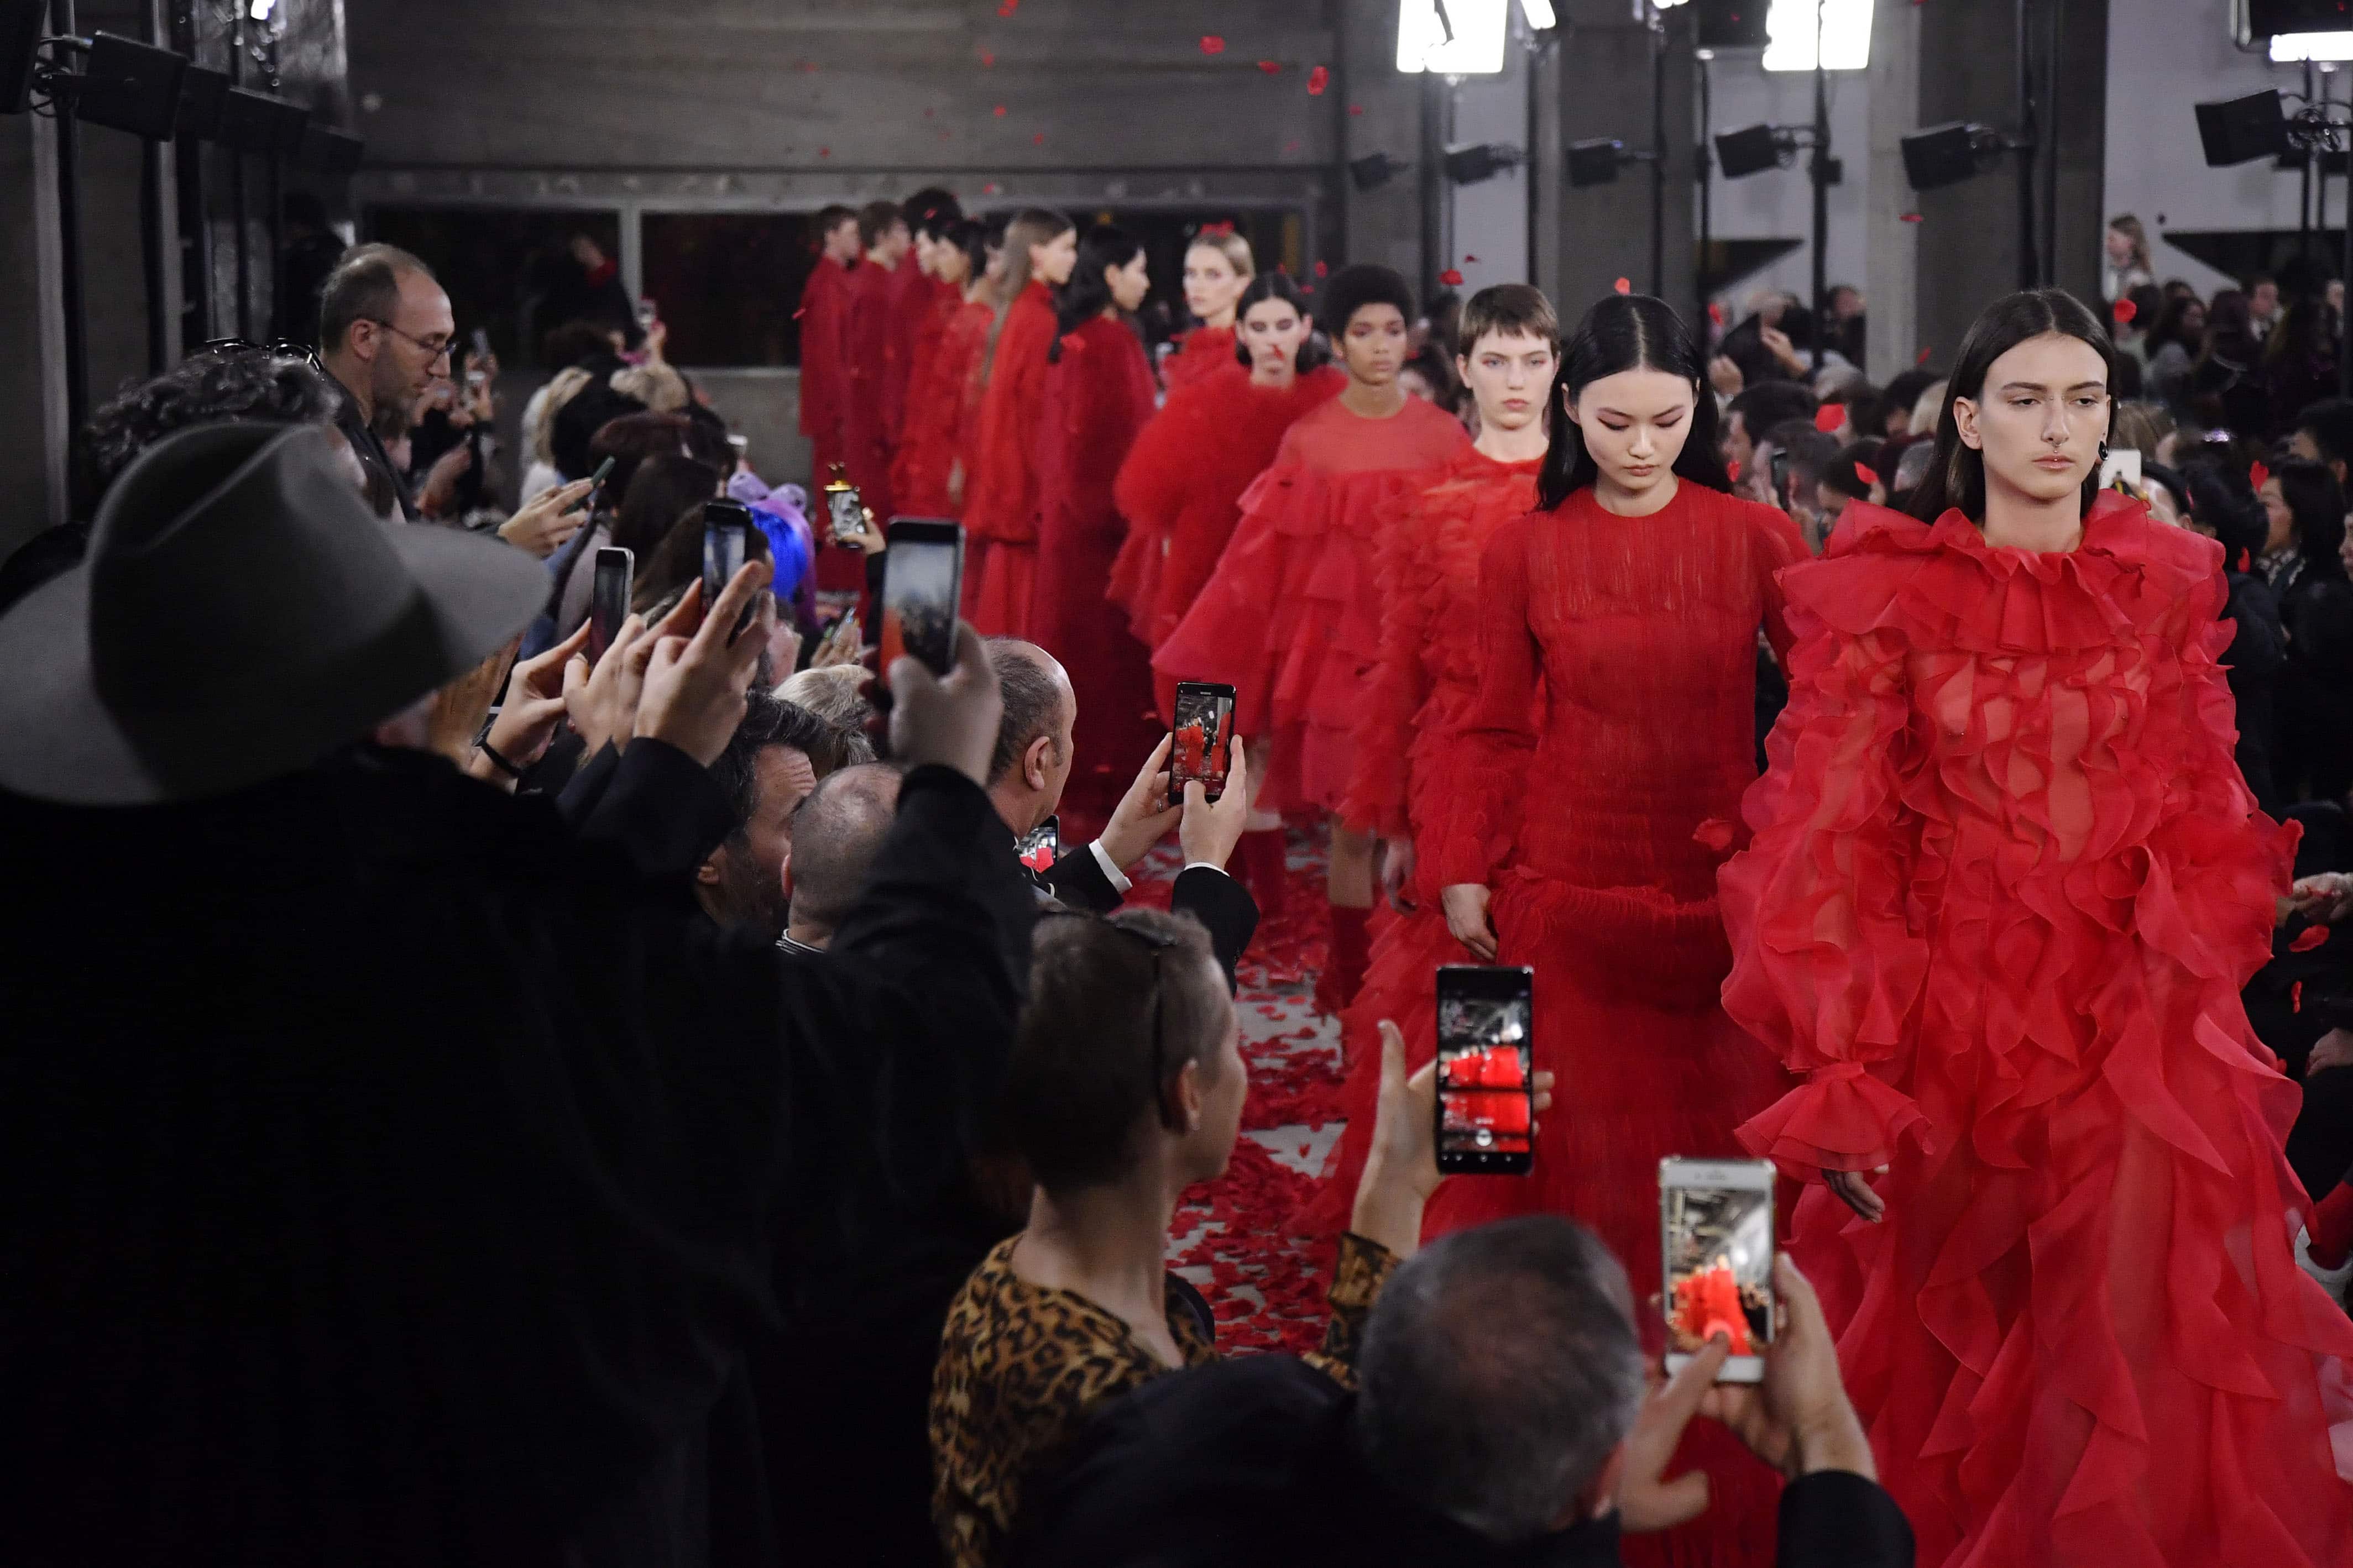 From Valentino’s show in Tokyo to Celine’s menswear campaign: The news this week